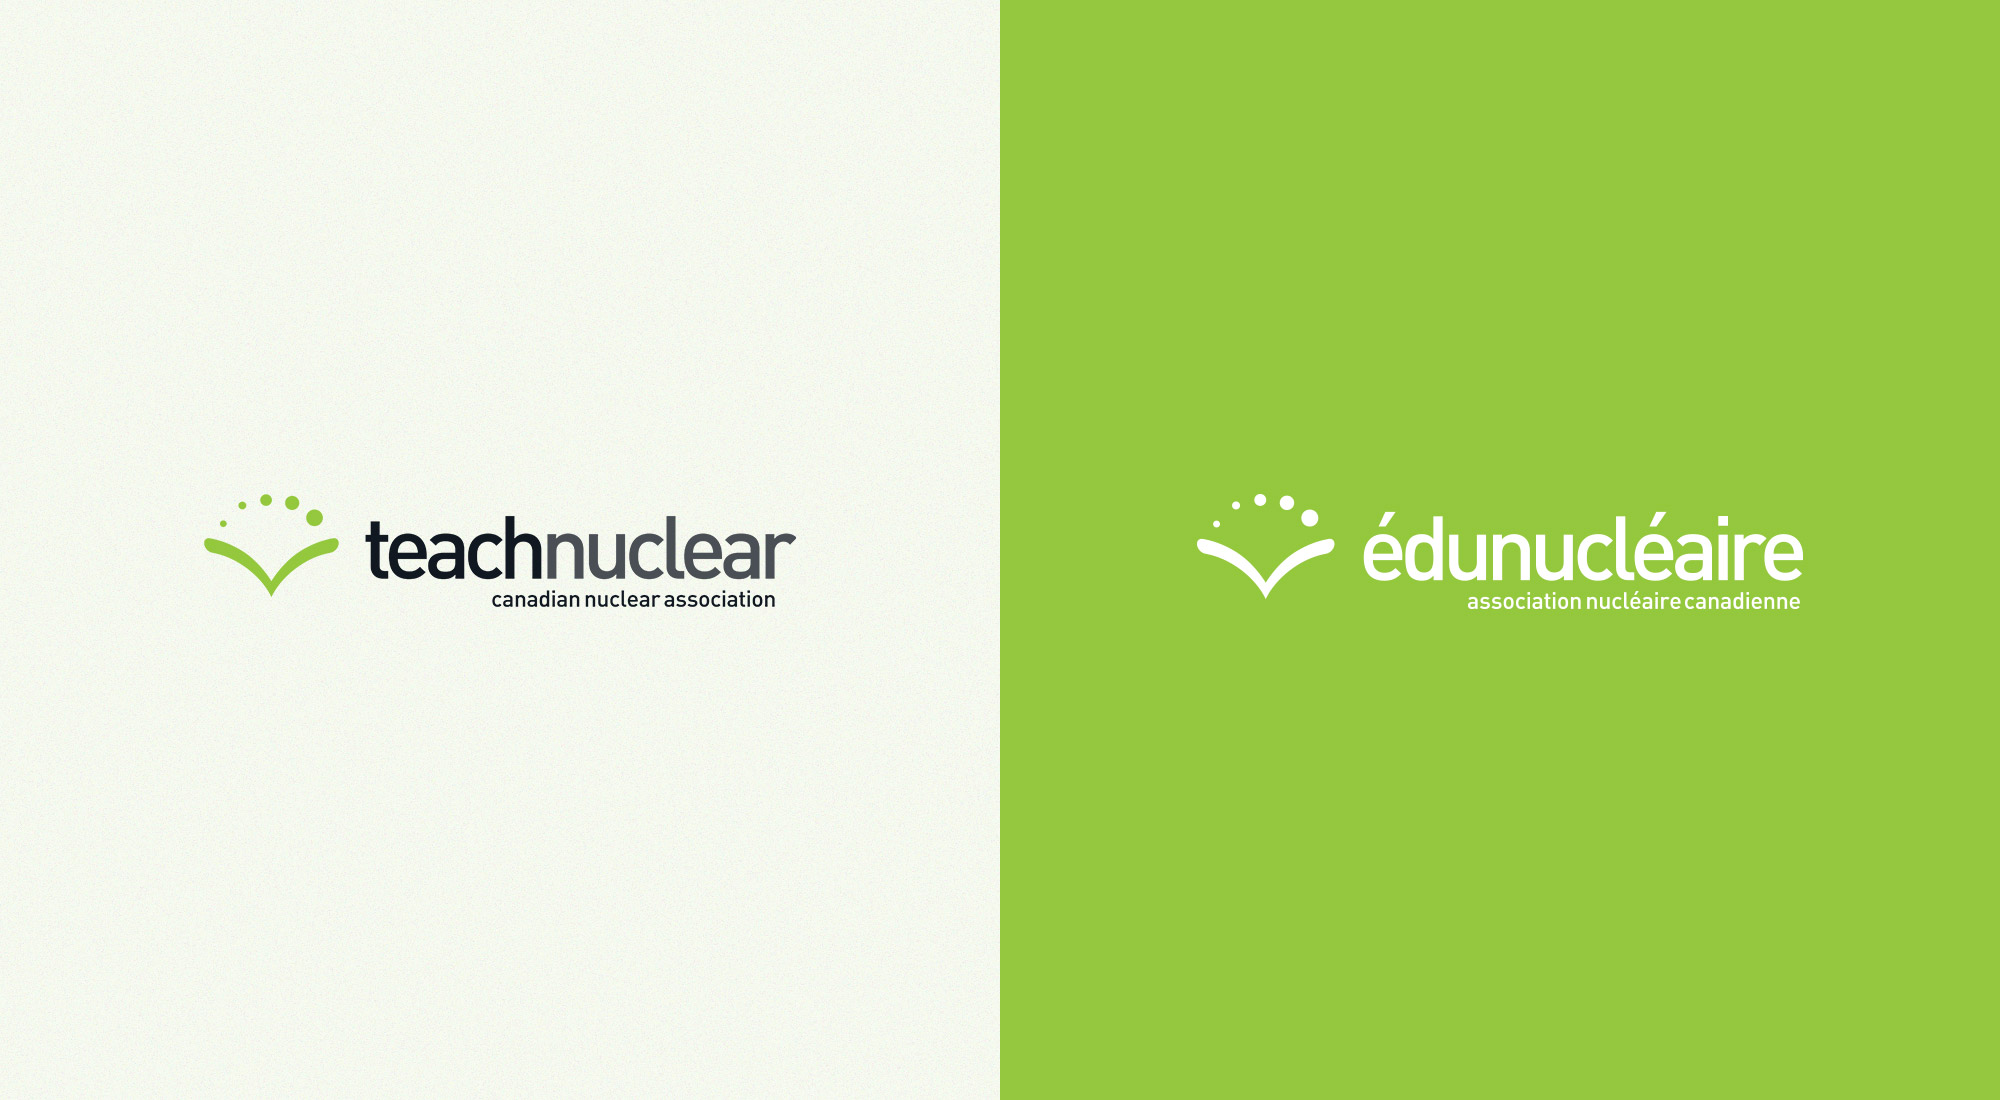 Teach Nuclear logo and white French version